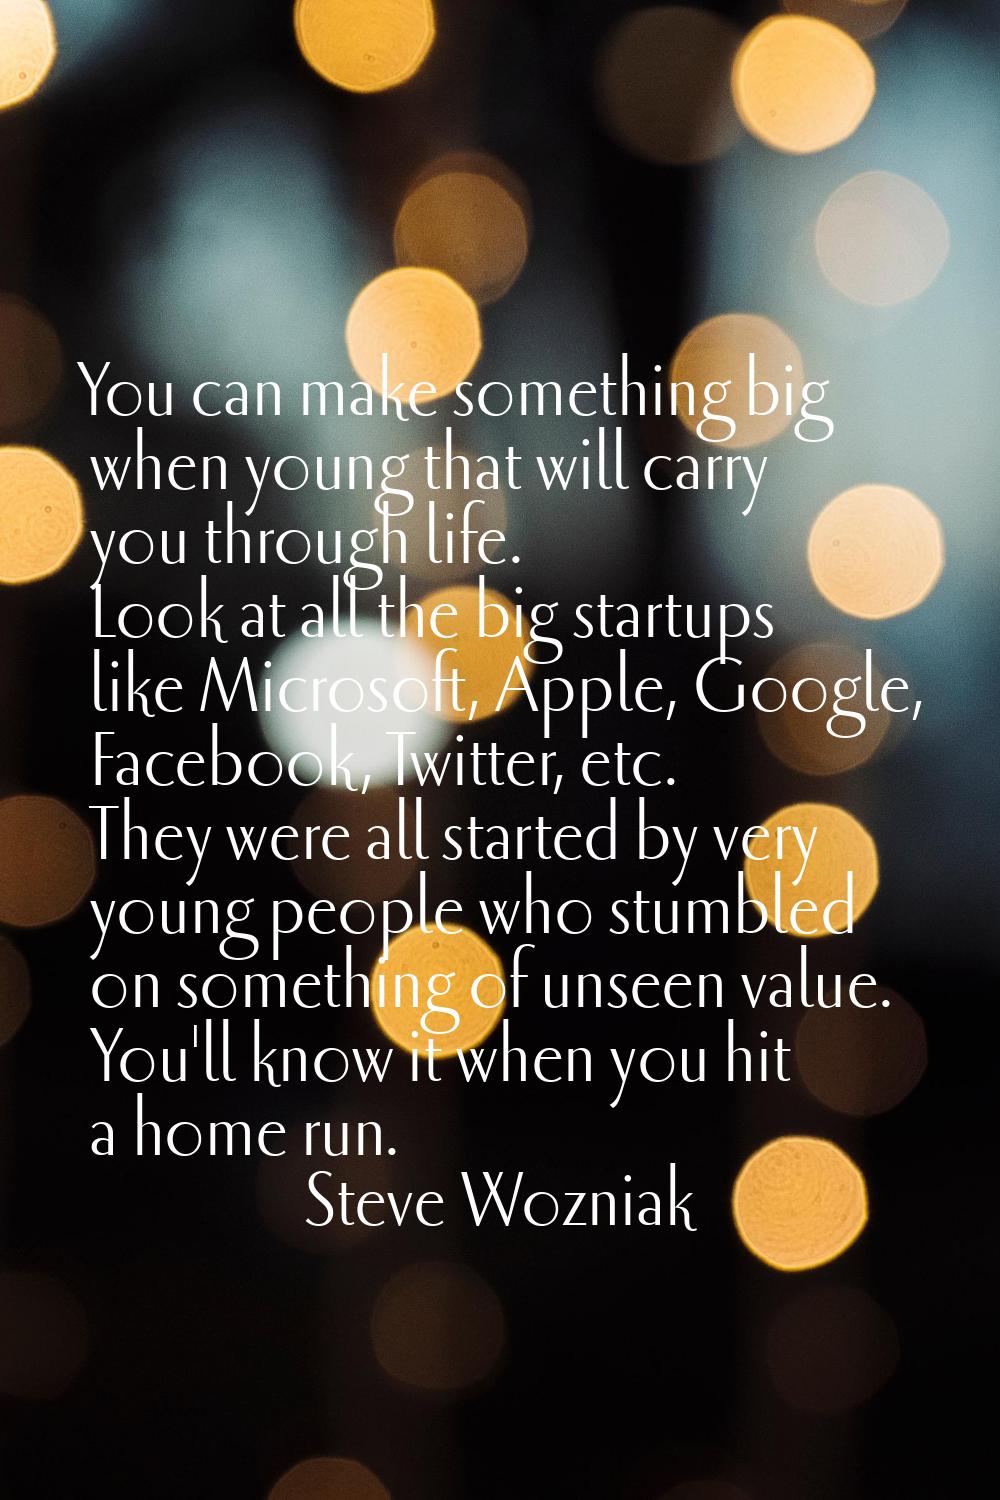 You can make something big when young that will carry you through life. Look at all the big startup